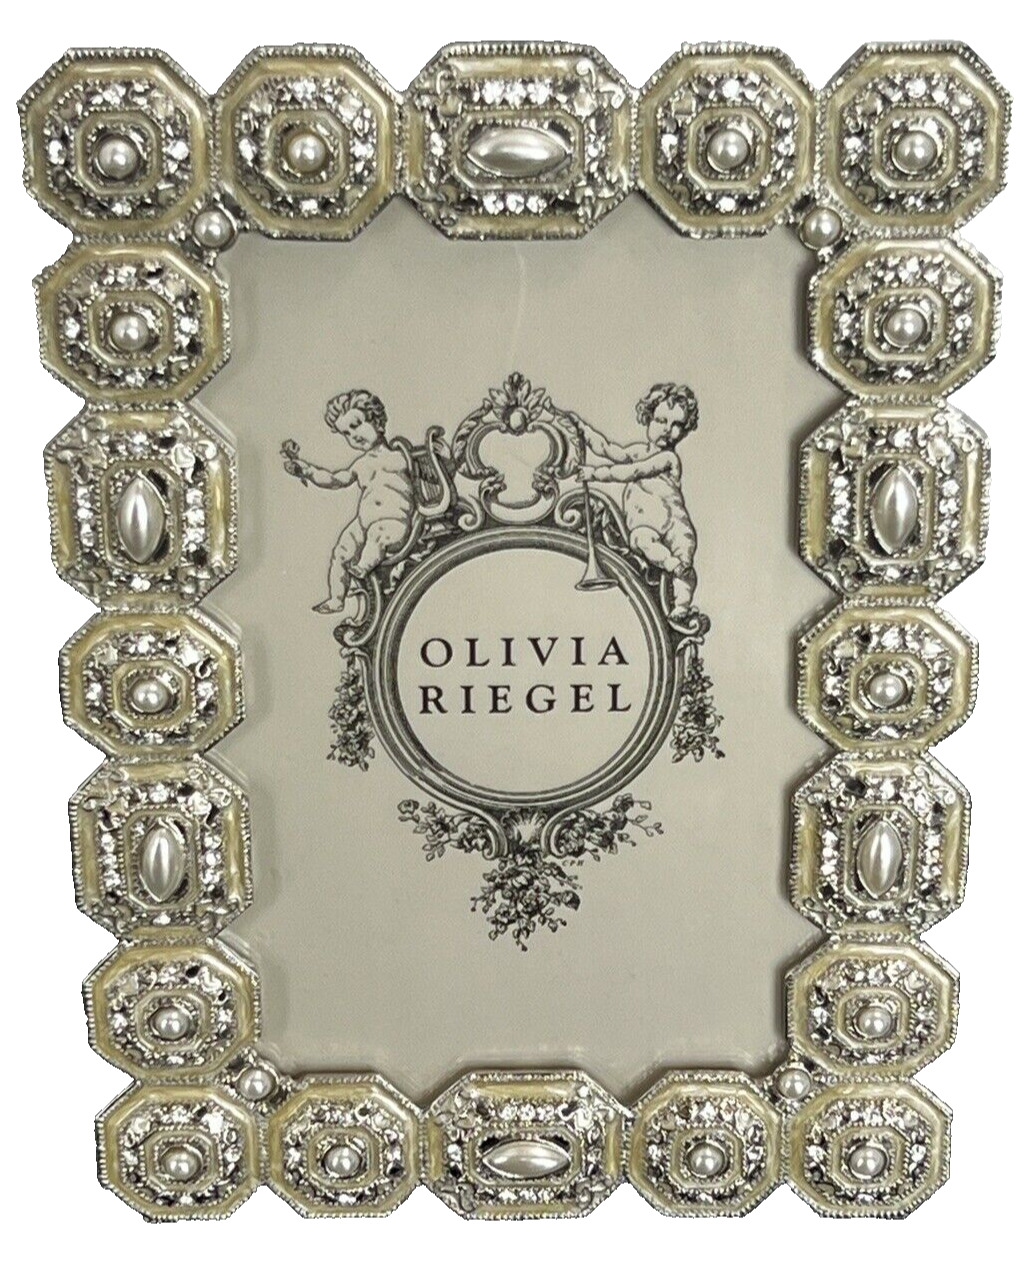 Olivia Riegel Picture Frame 5x7 Enamel Pearls Crystals Pewter